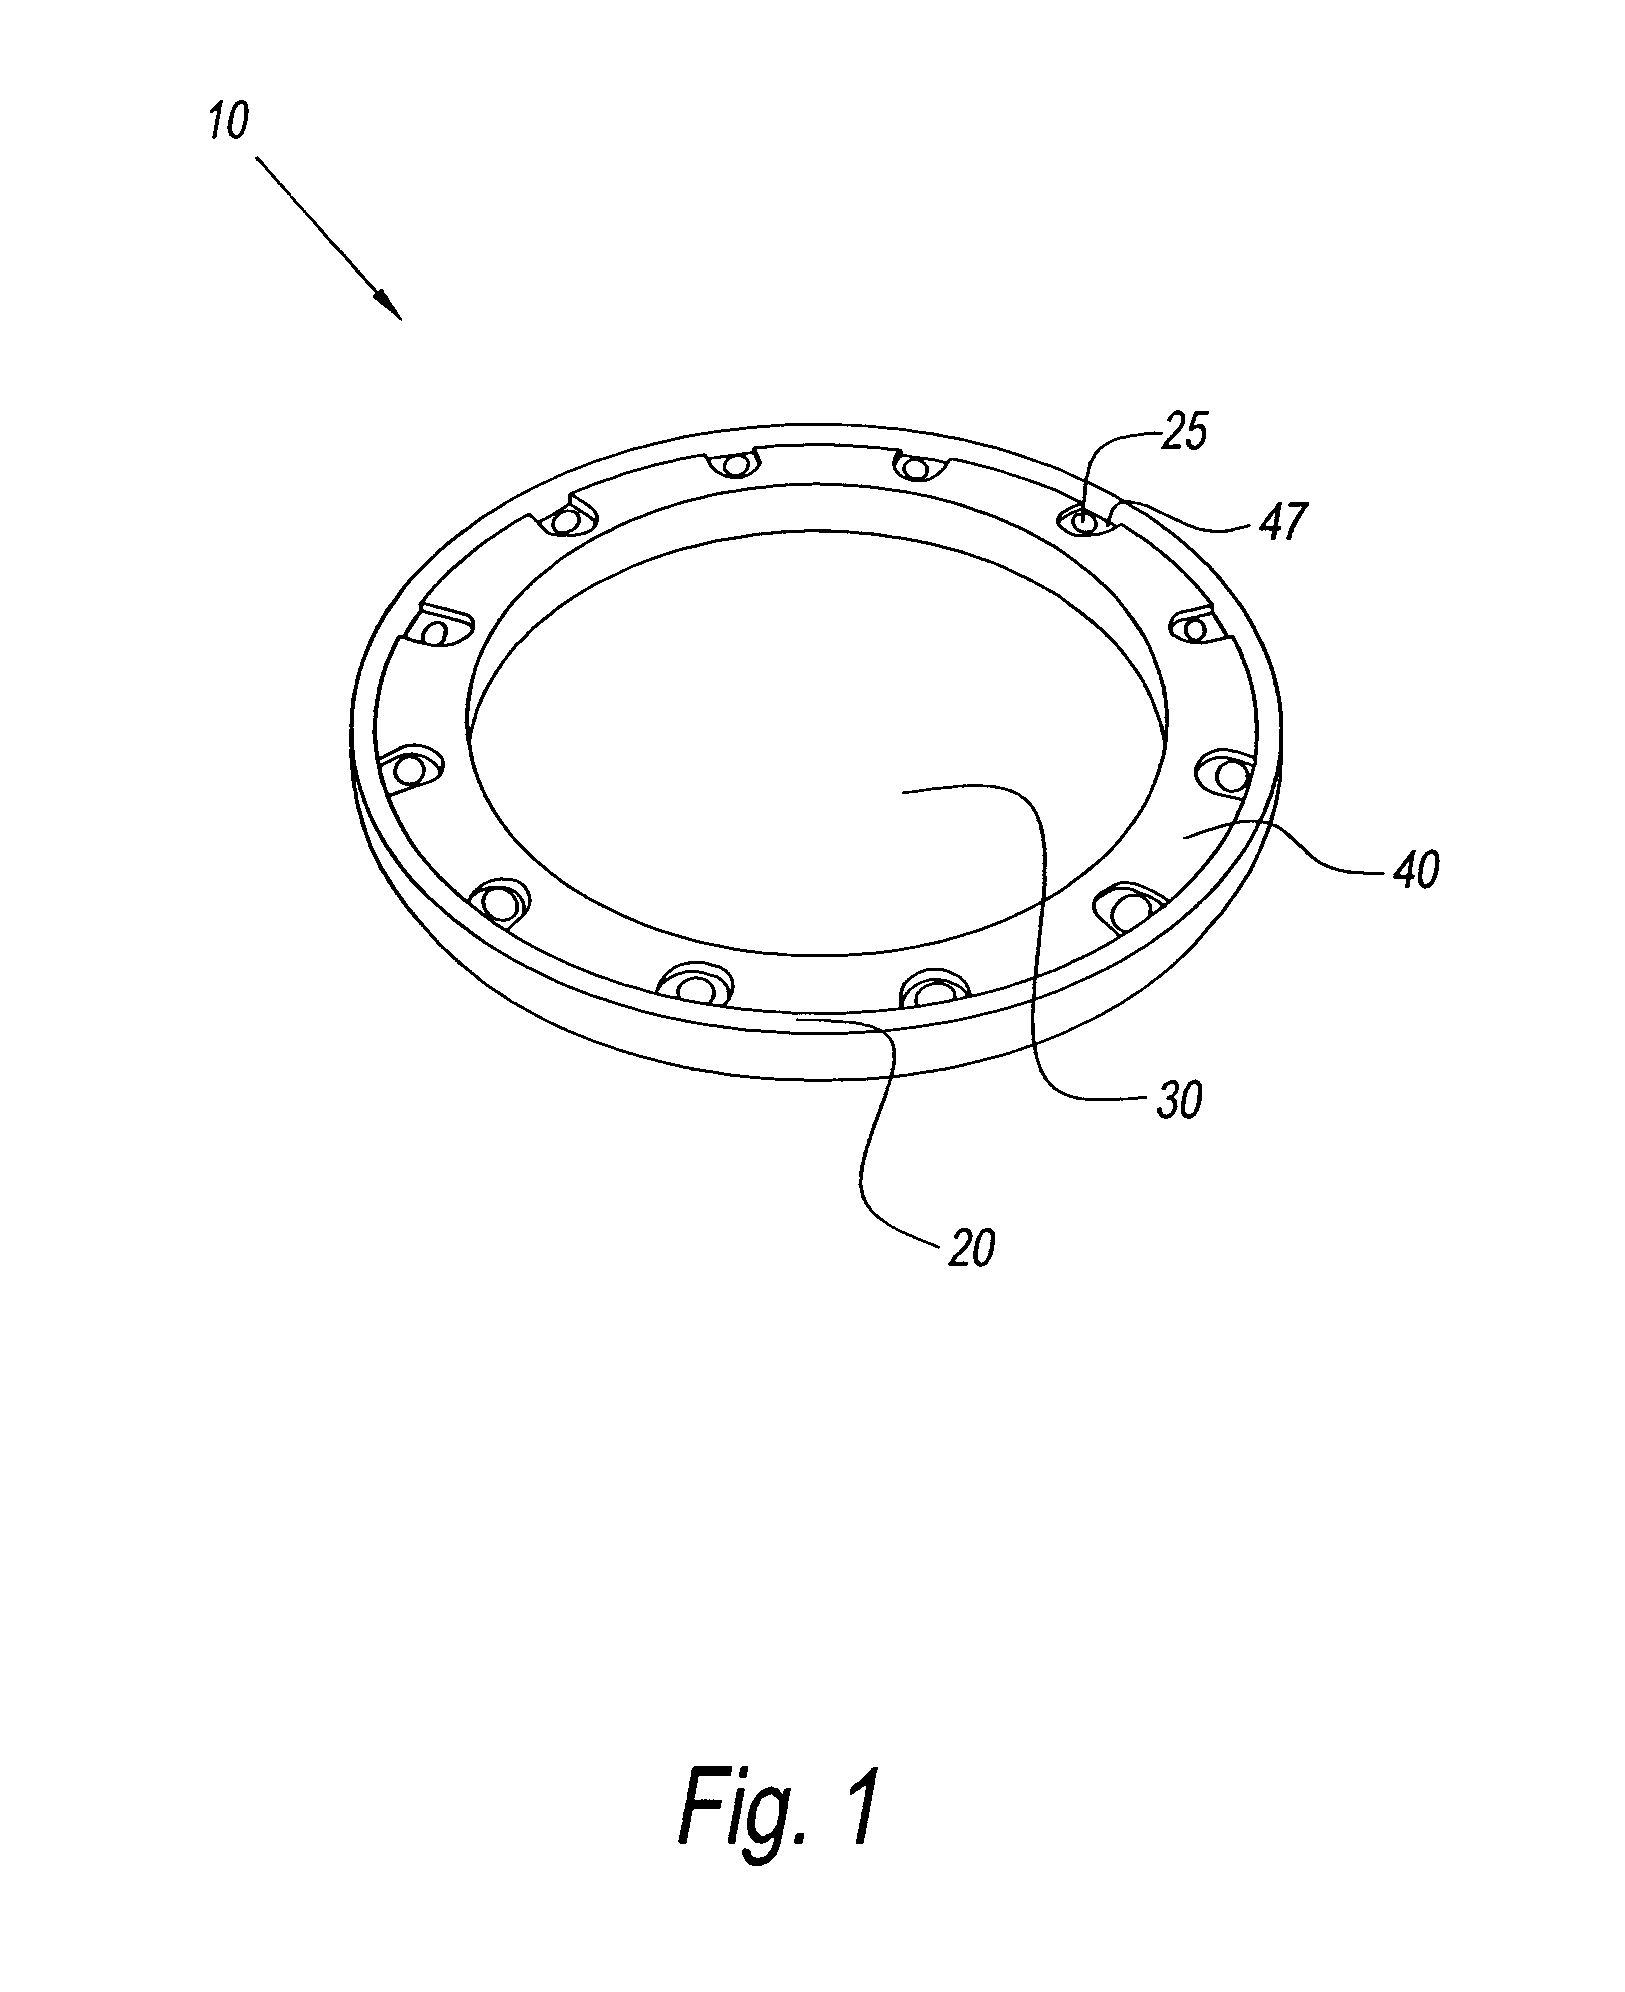 Drum head assembly and method of tensioning a drum head